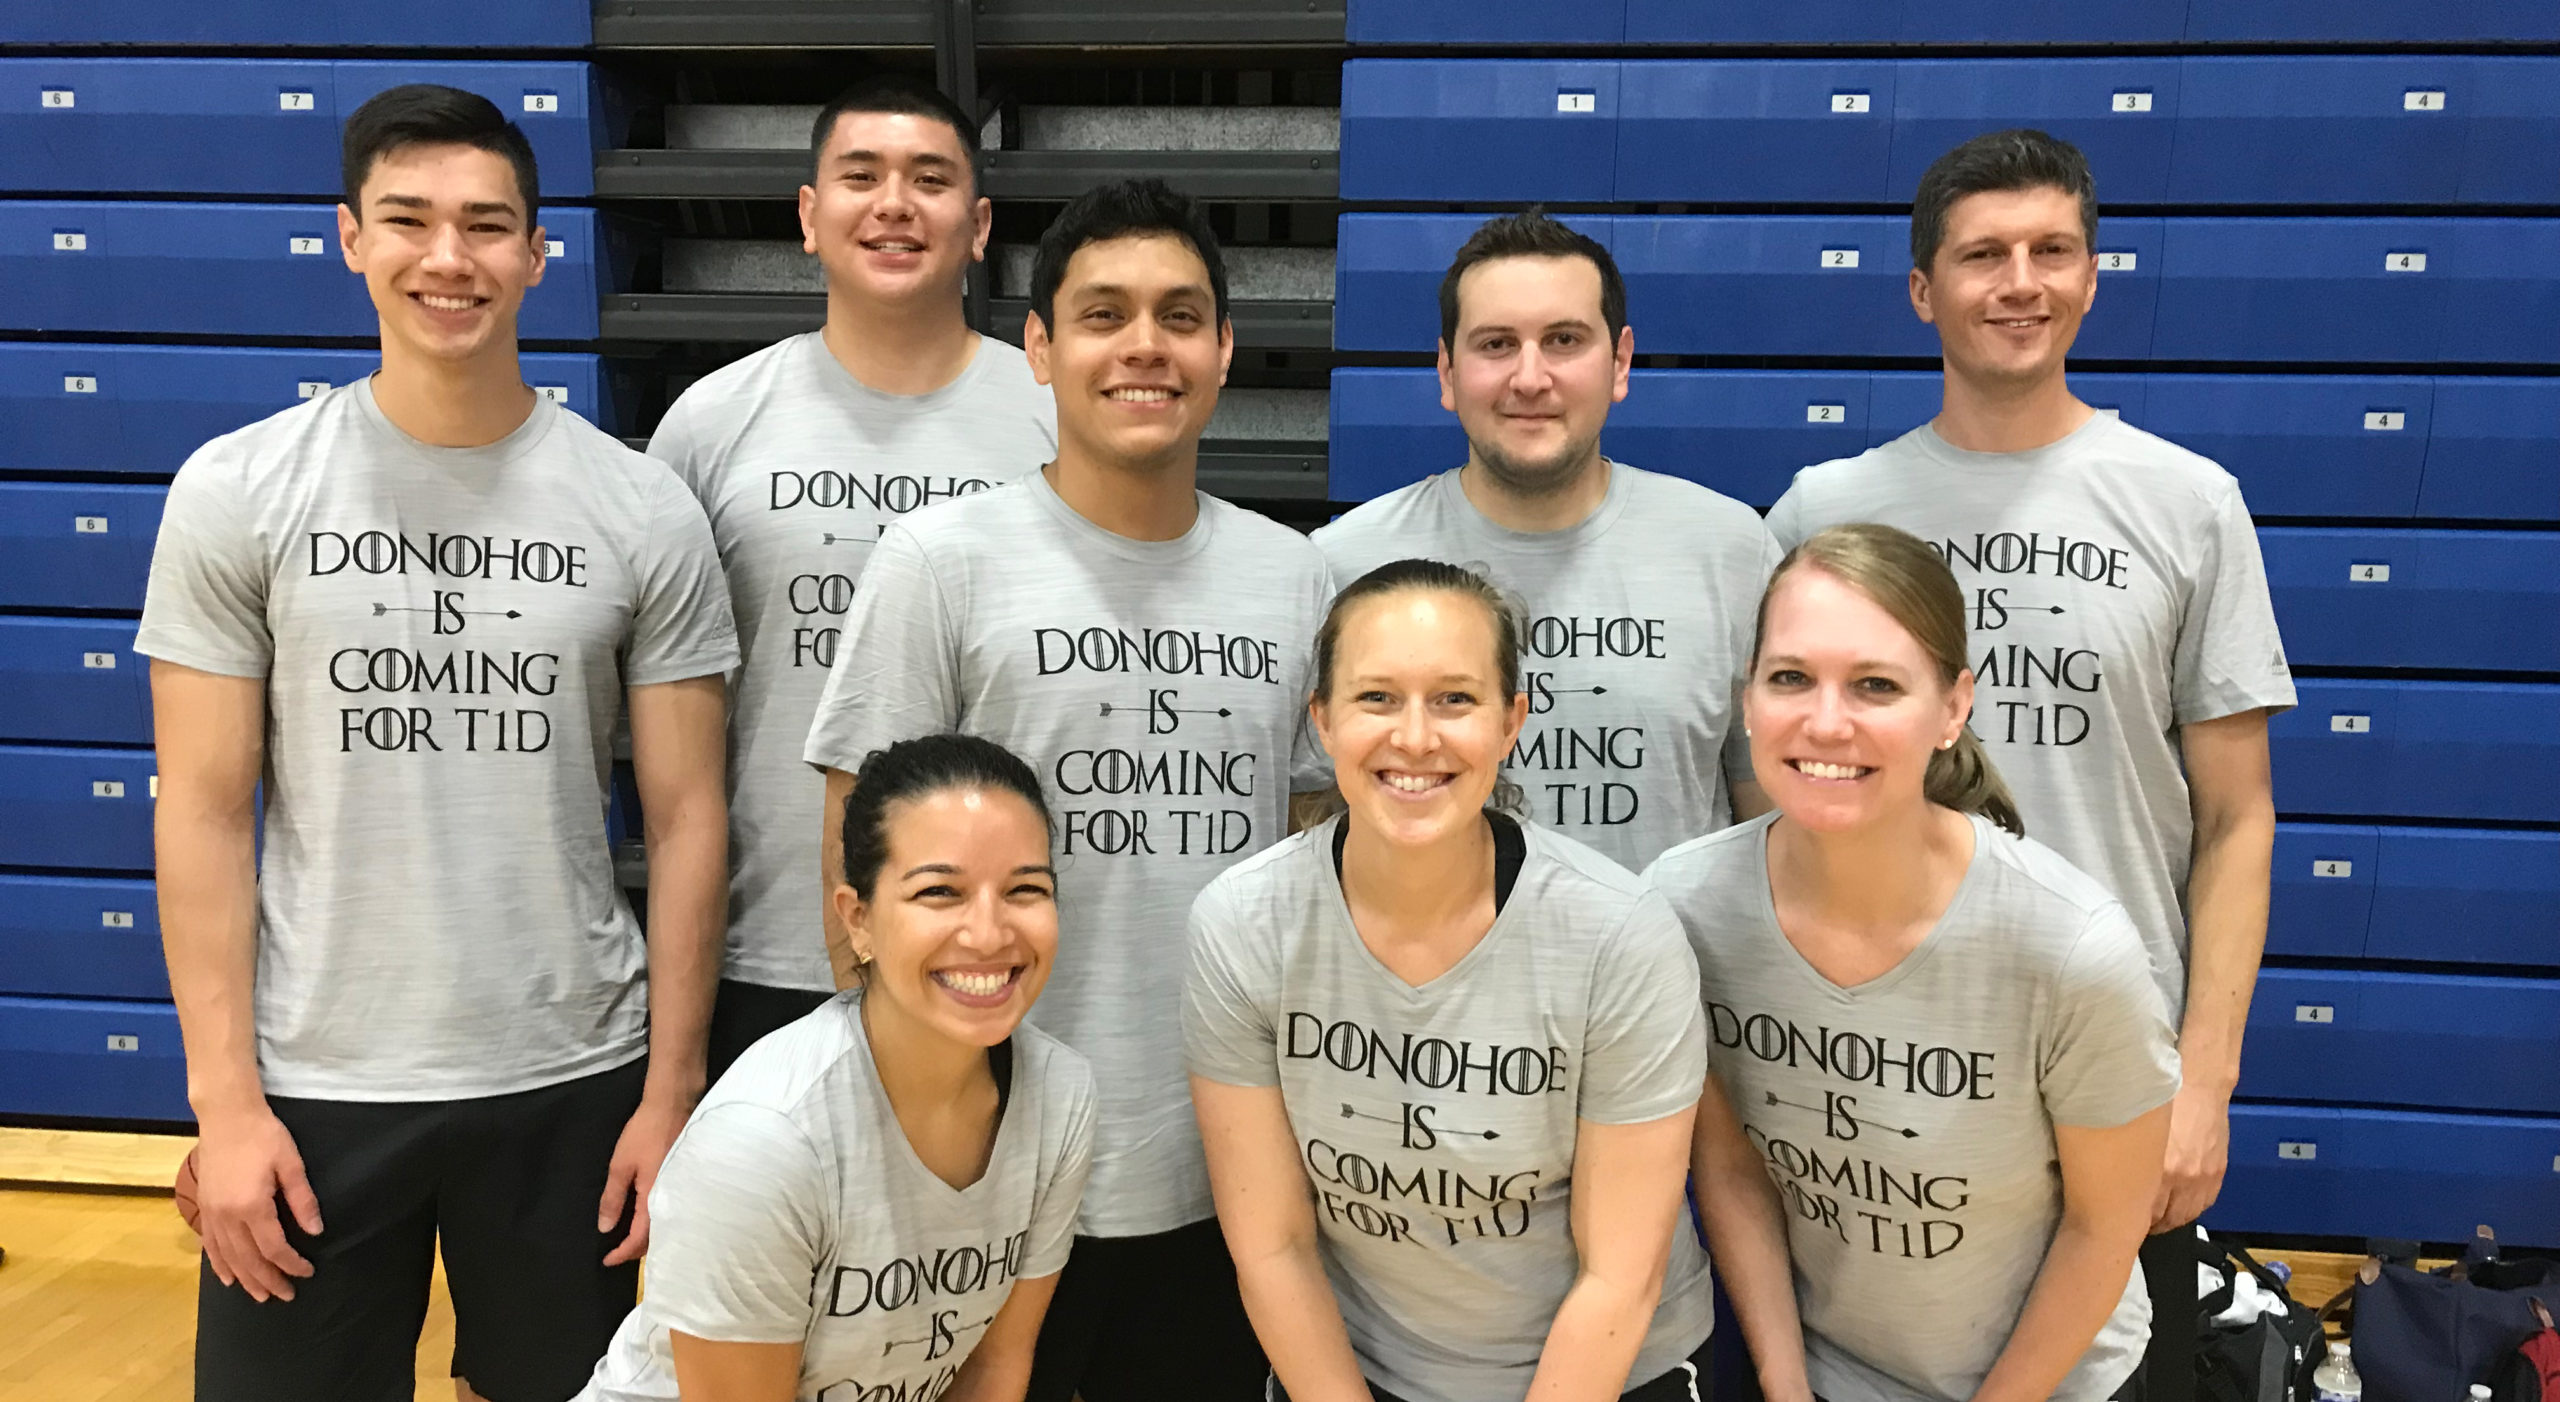 Donohoe Teams Rally for T1D at the JDRF Real Estate Games Thumbnail